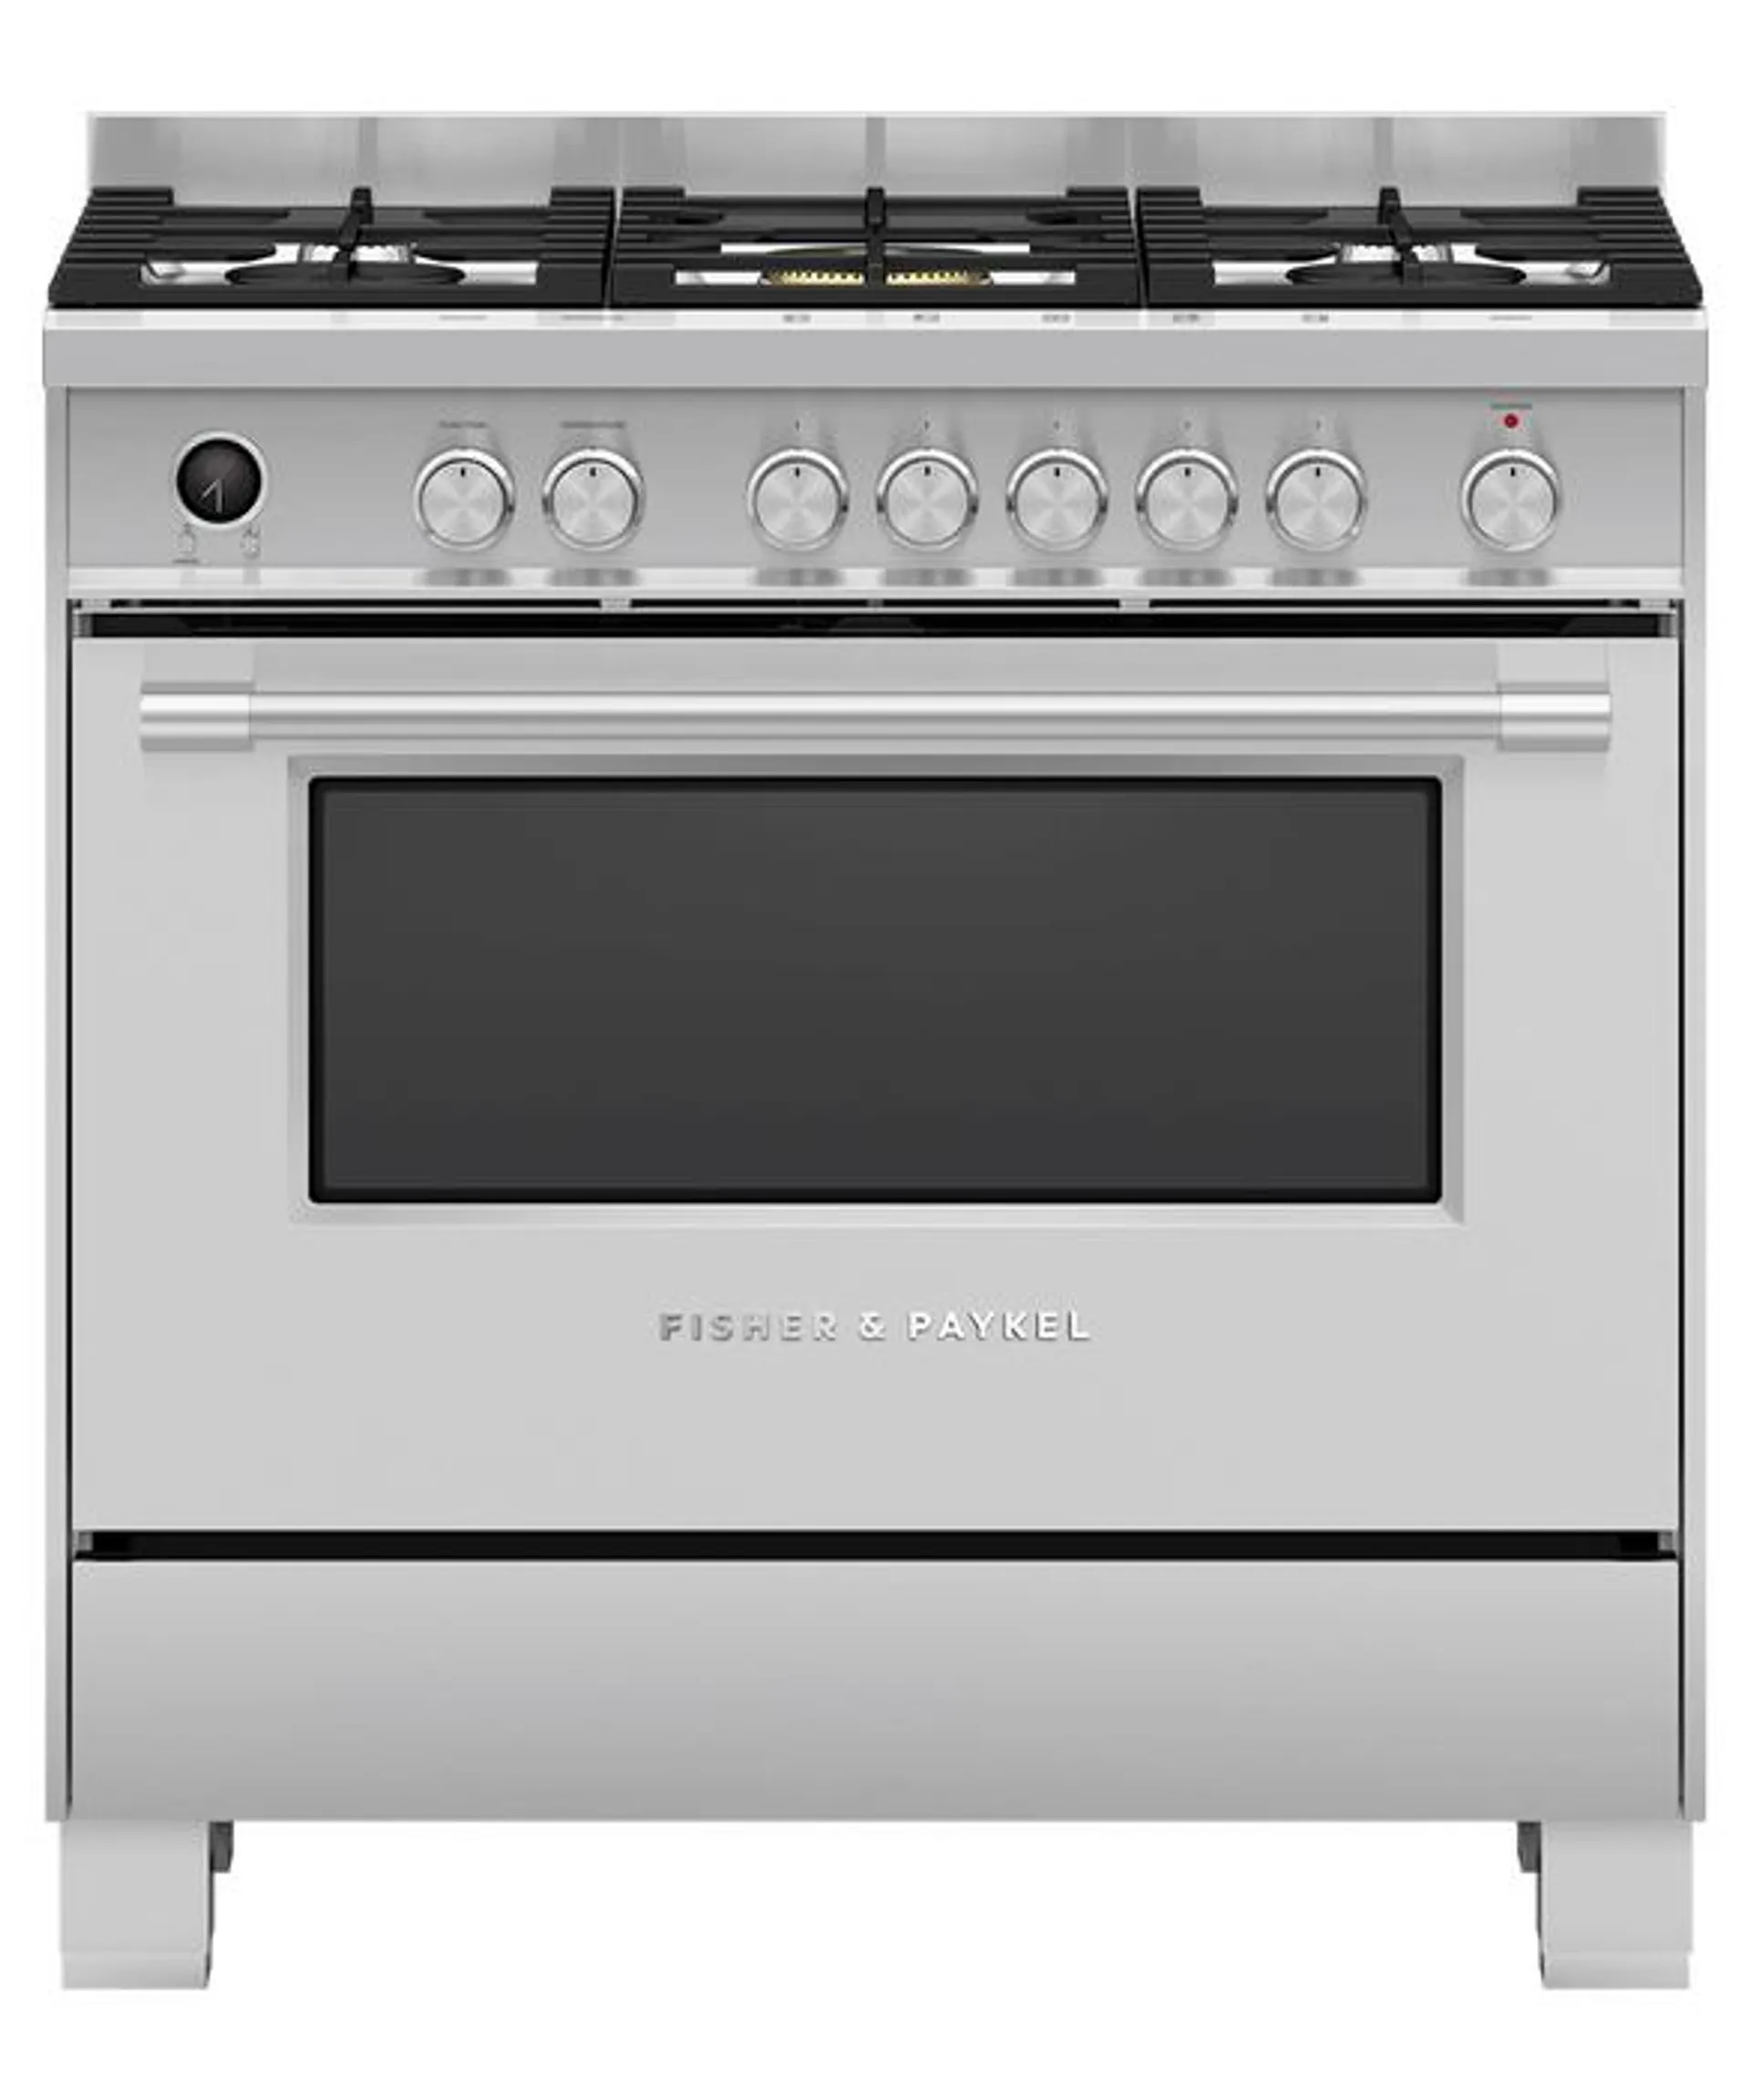 Freestanding Cooker, Dual Fuel, 90cm, 5 Burners, Self-cleaning